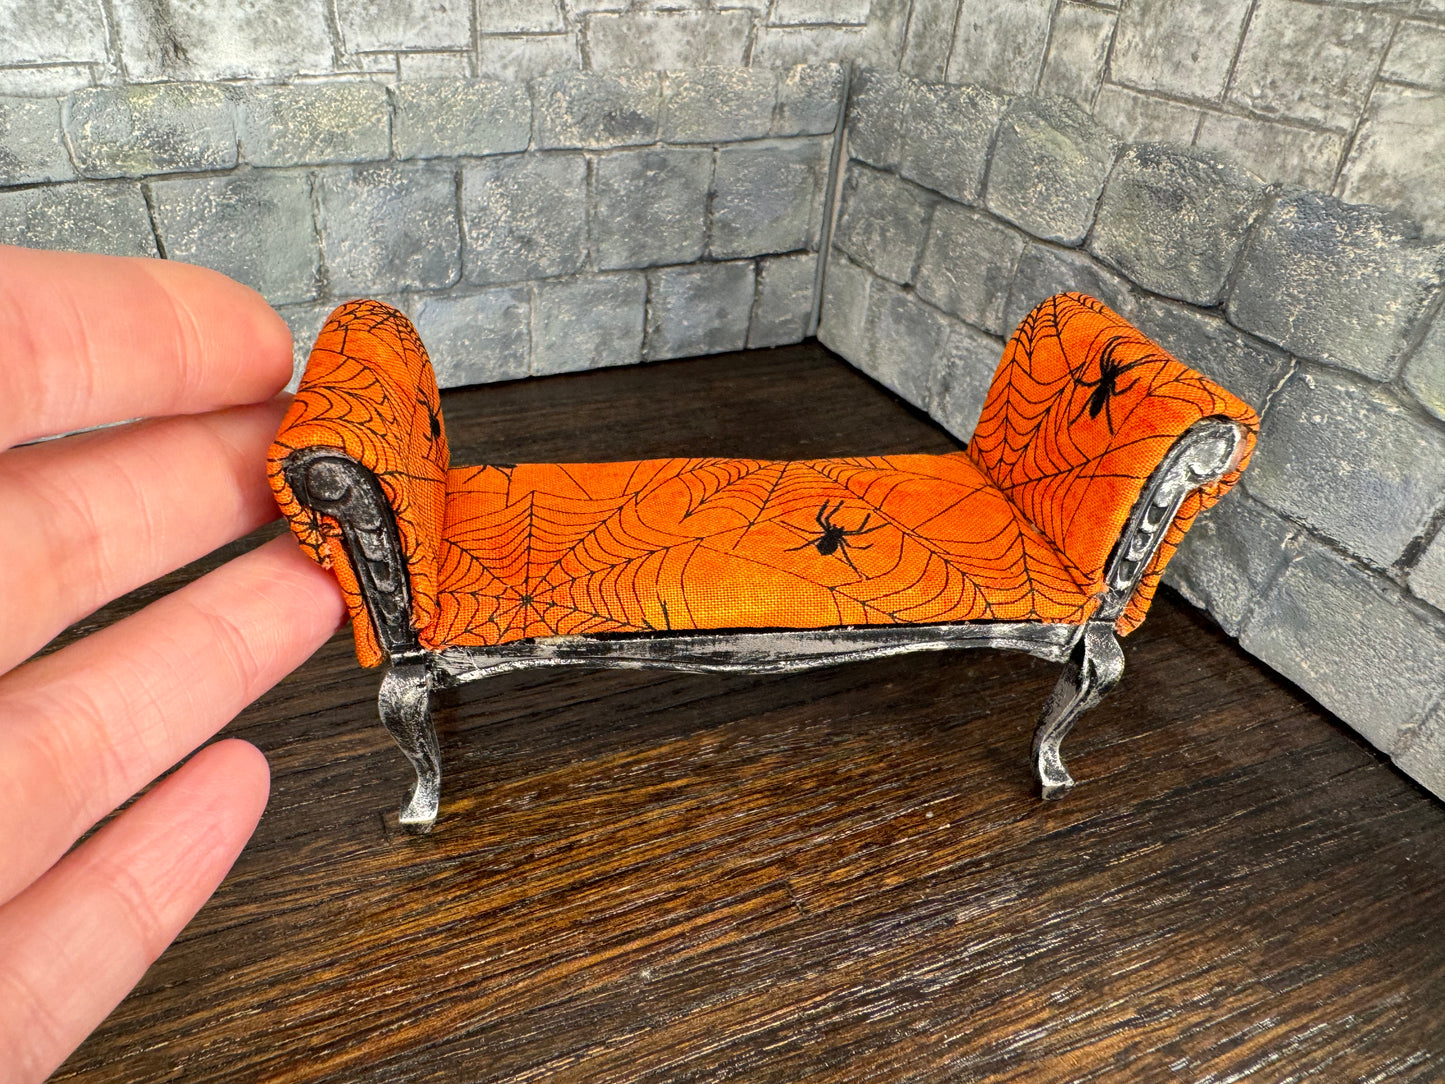 Cobwebs and Spiders on Orange Bench - 1:12 Scale